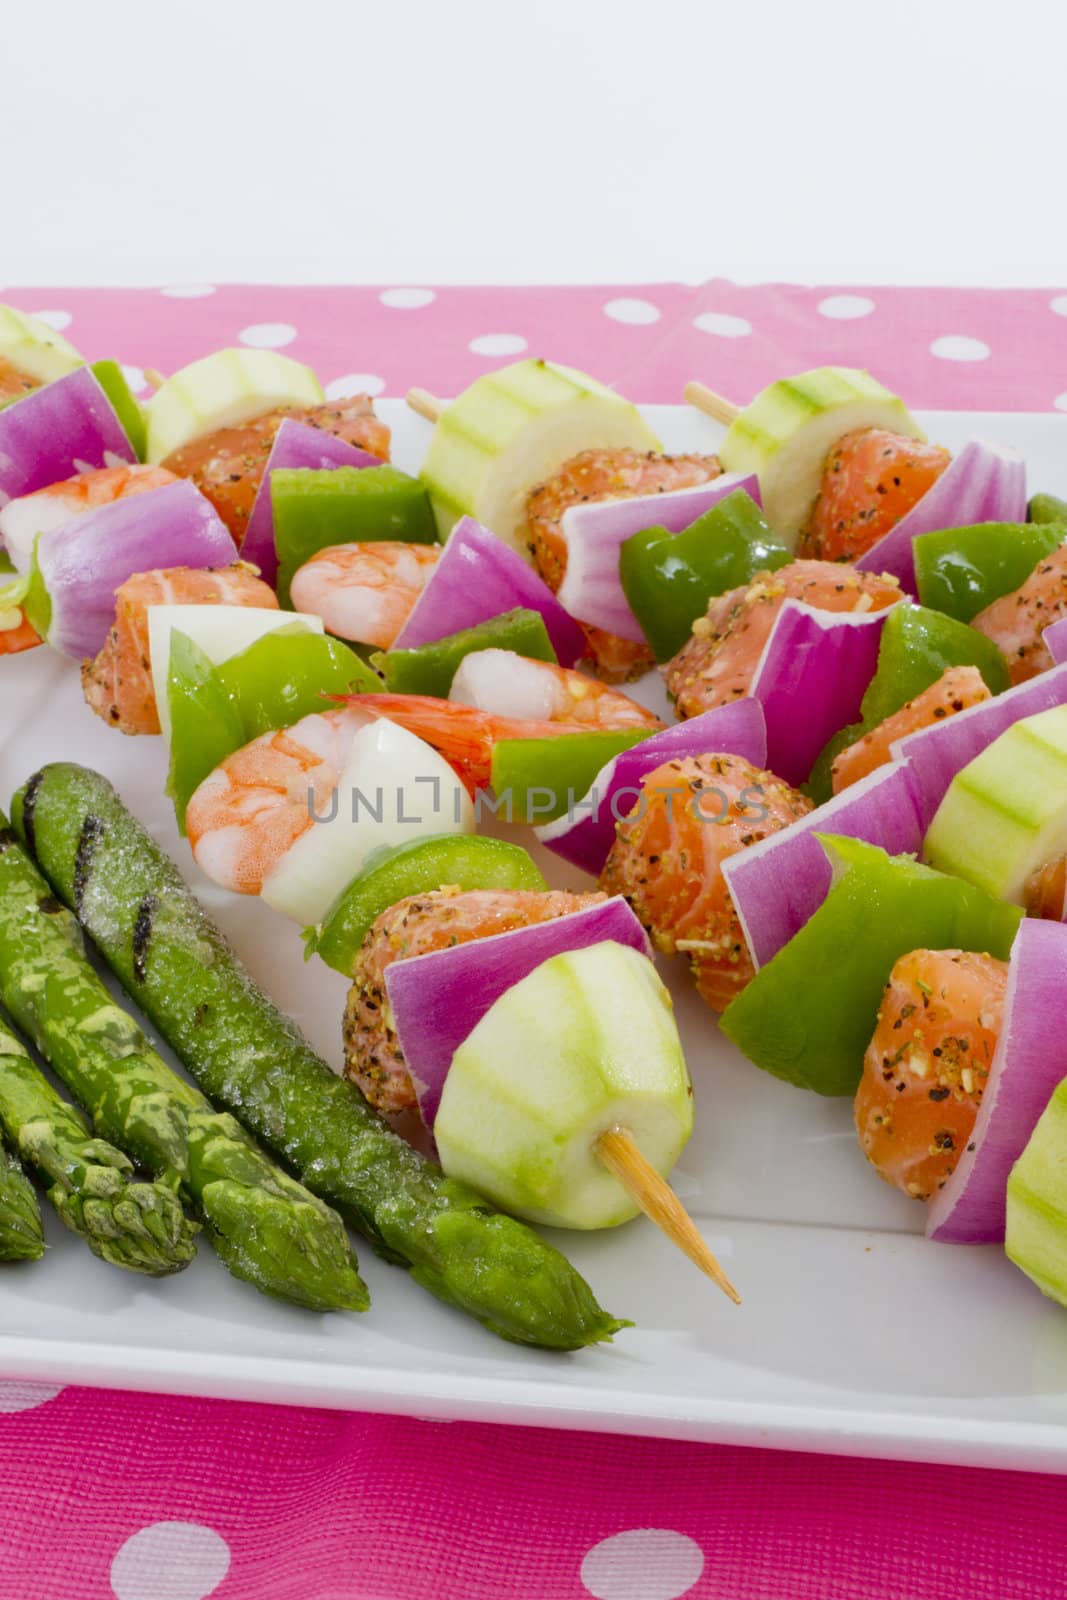 Salmon cubes and Shrimp complimented with vegetables on skewers. Ready to cook. Red onions, zucchini, green peppers and asparagus.